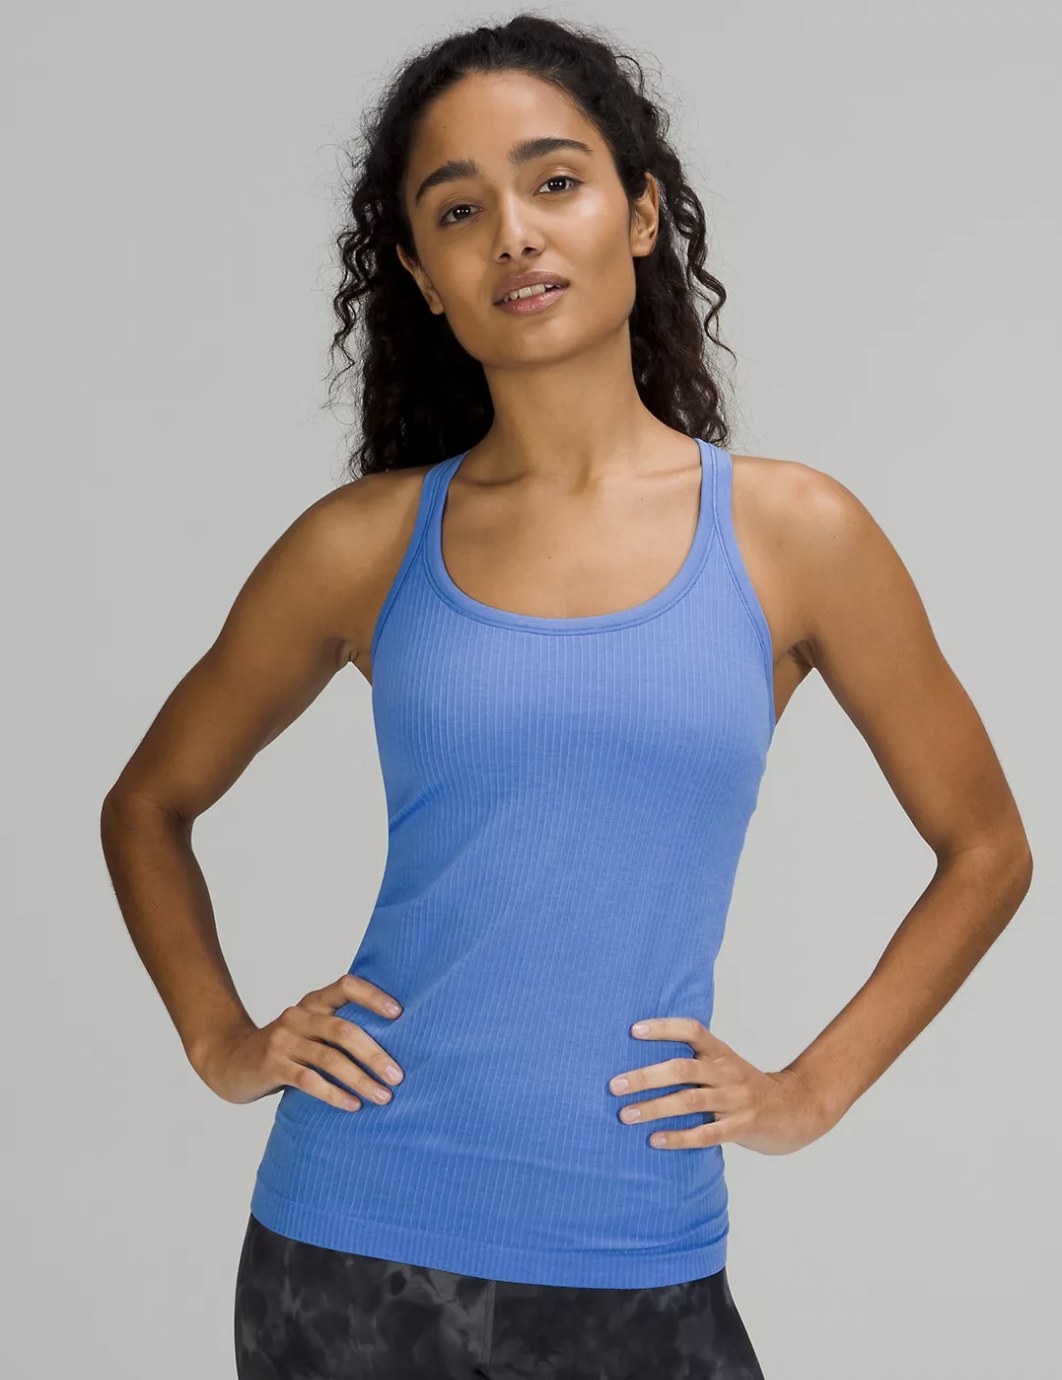 front view of model wearing the tank top in blue